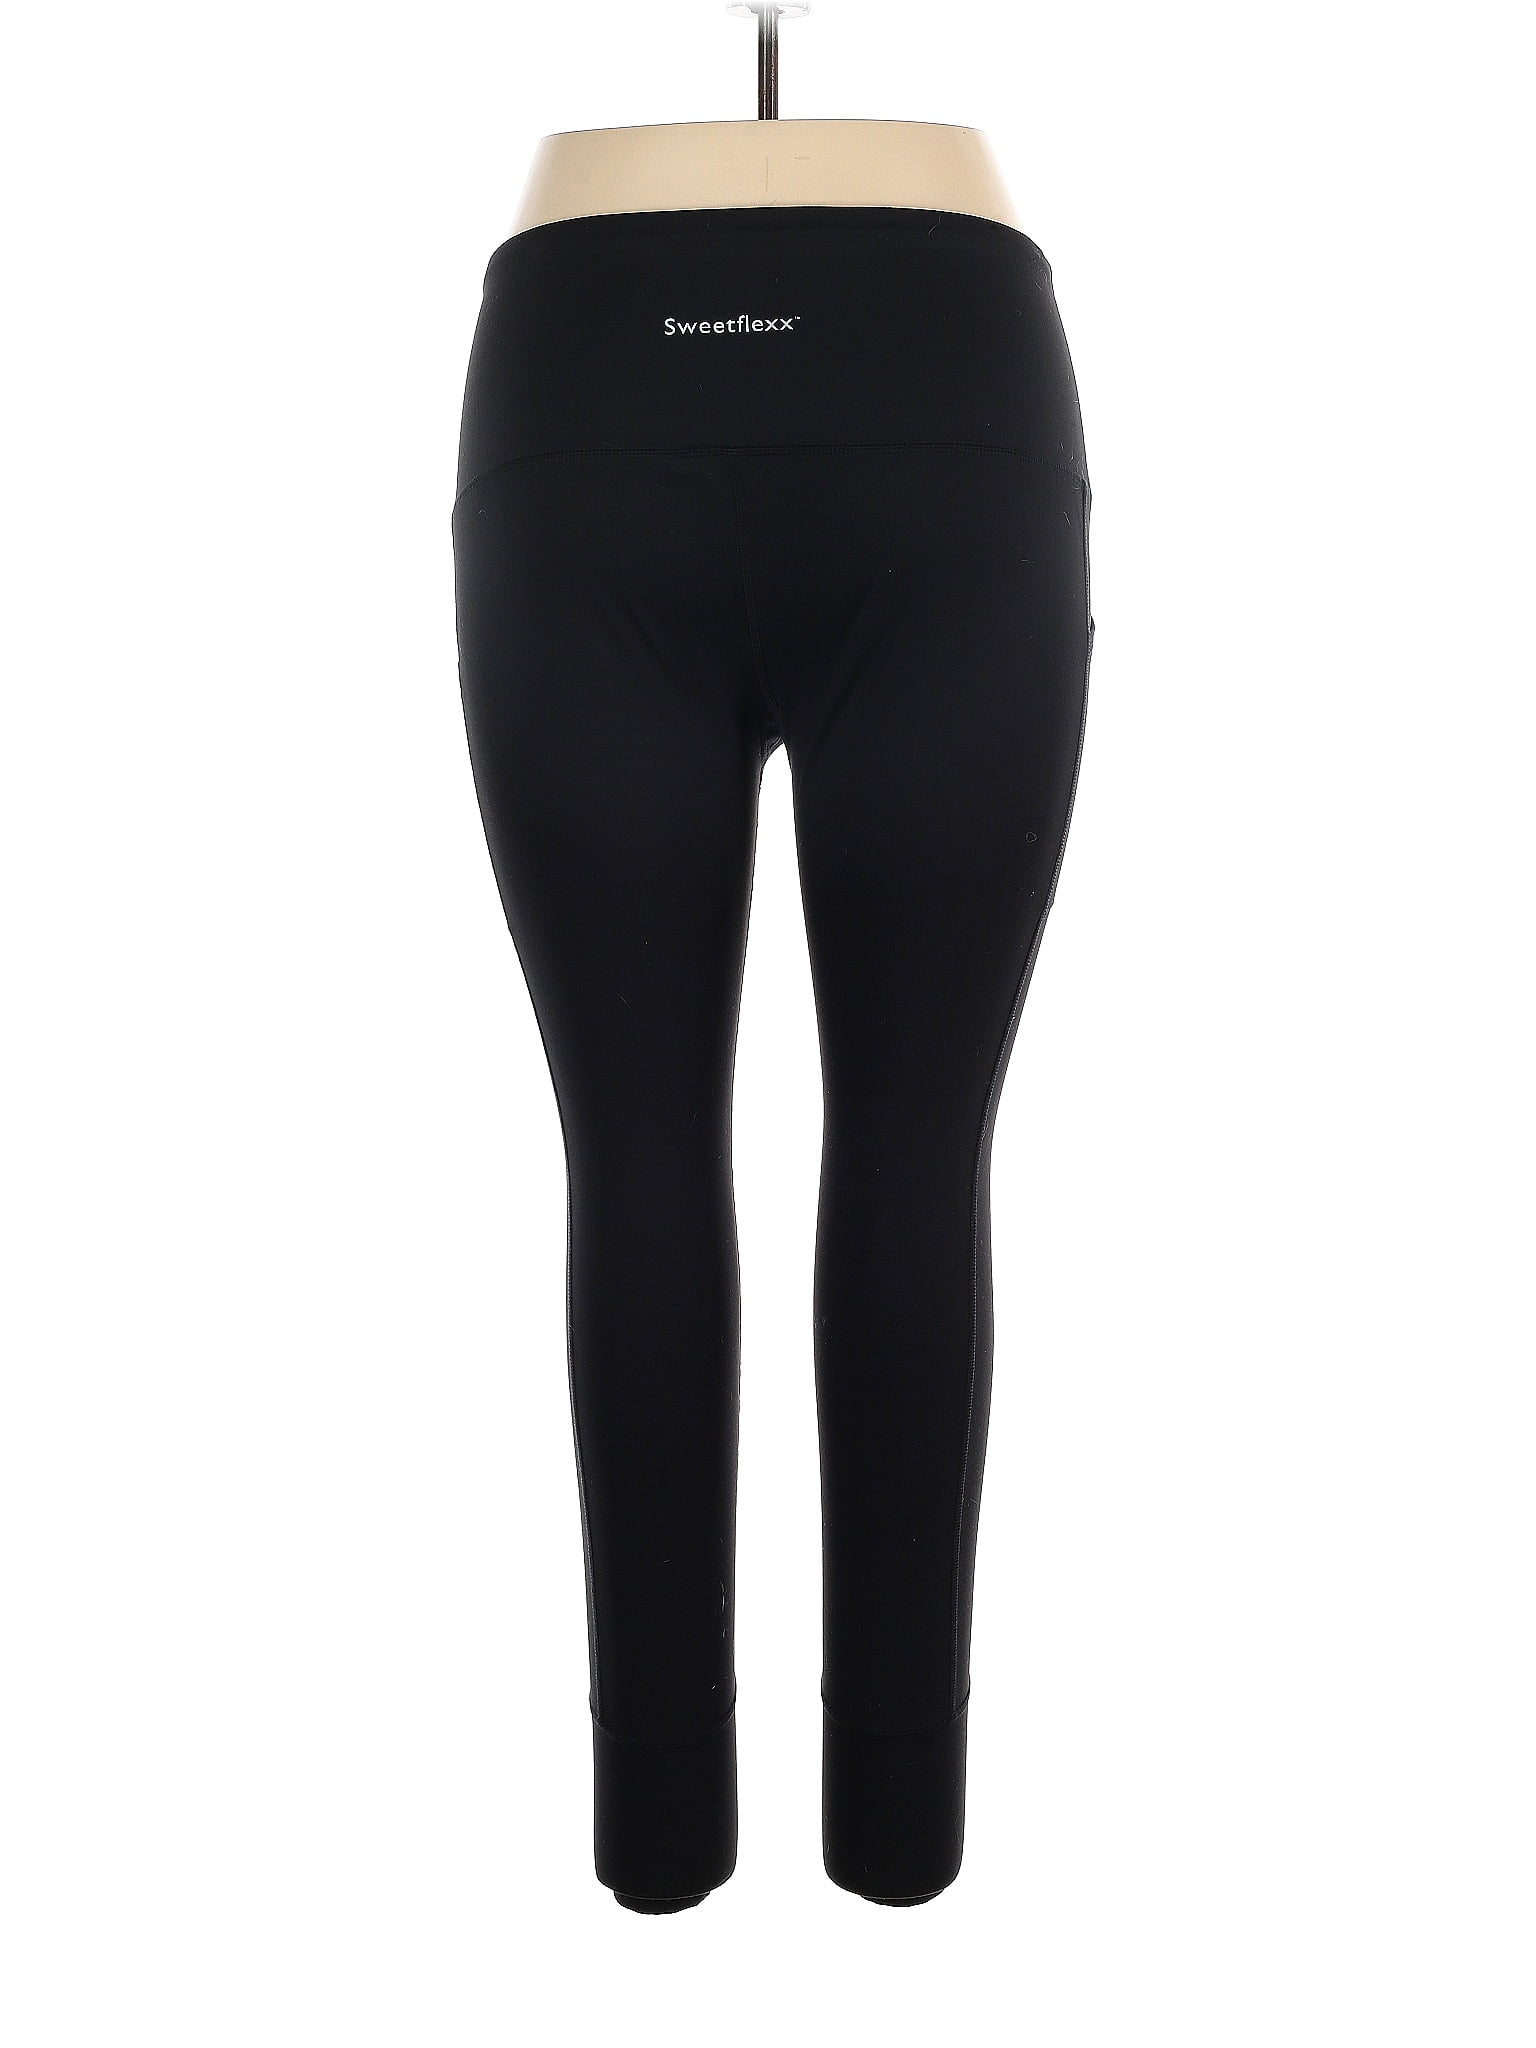 Sweetflexx Solid Black Active Pants Size 16 - 72% off